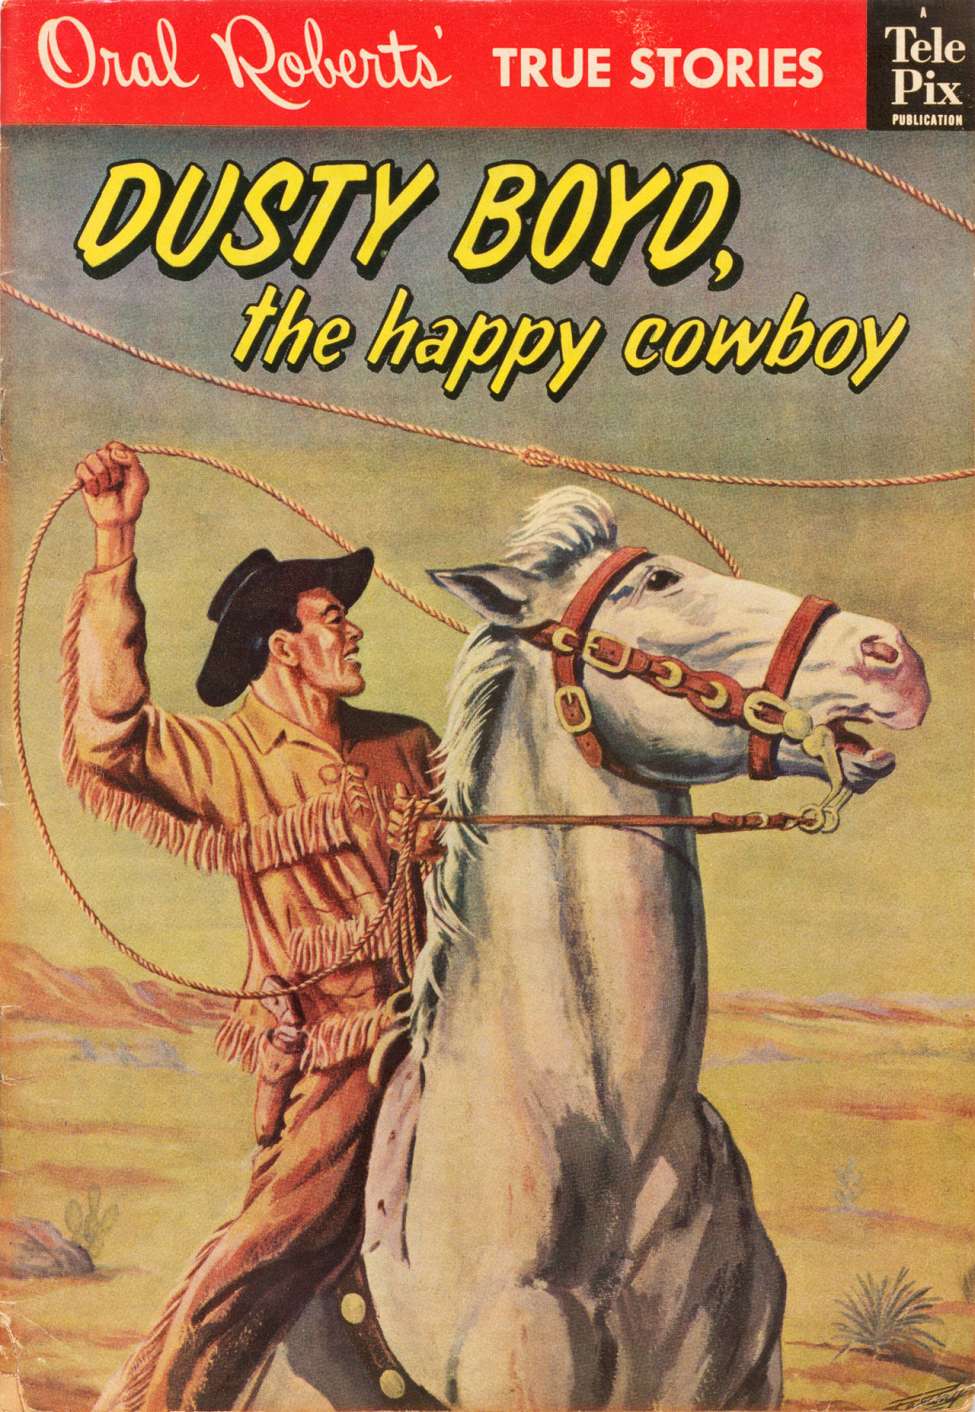 Book Cover For Oral Roberts' True Stories 109 - Dusty Boyd, The Happy Cowboy